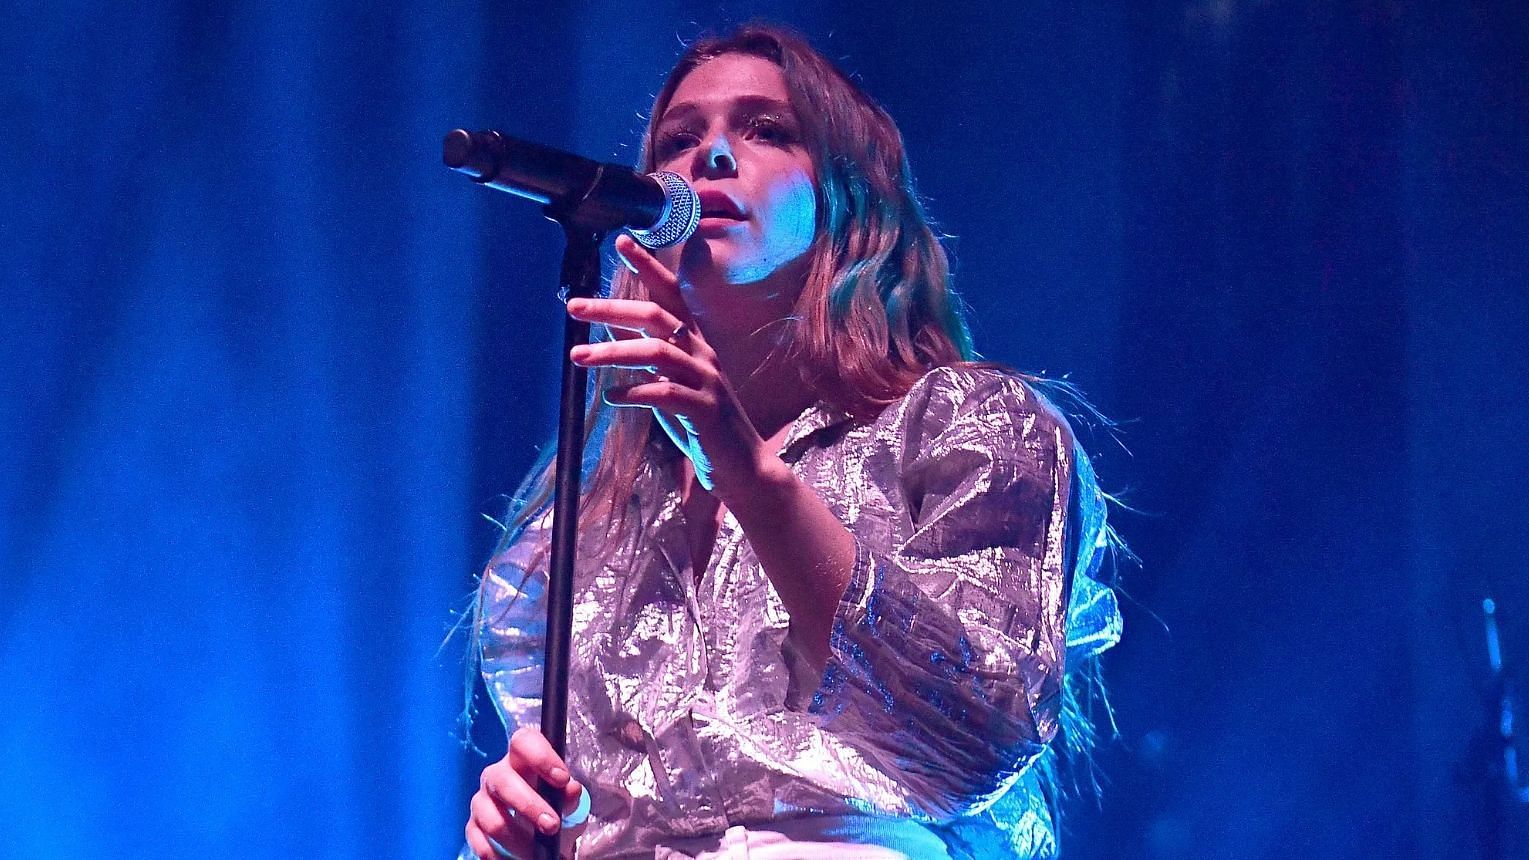 Maggie Rogers The Feral Joy Tour 2023 Tickets, presale, where to buy